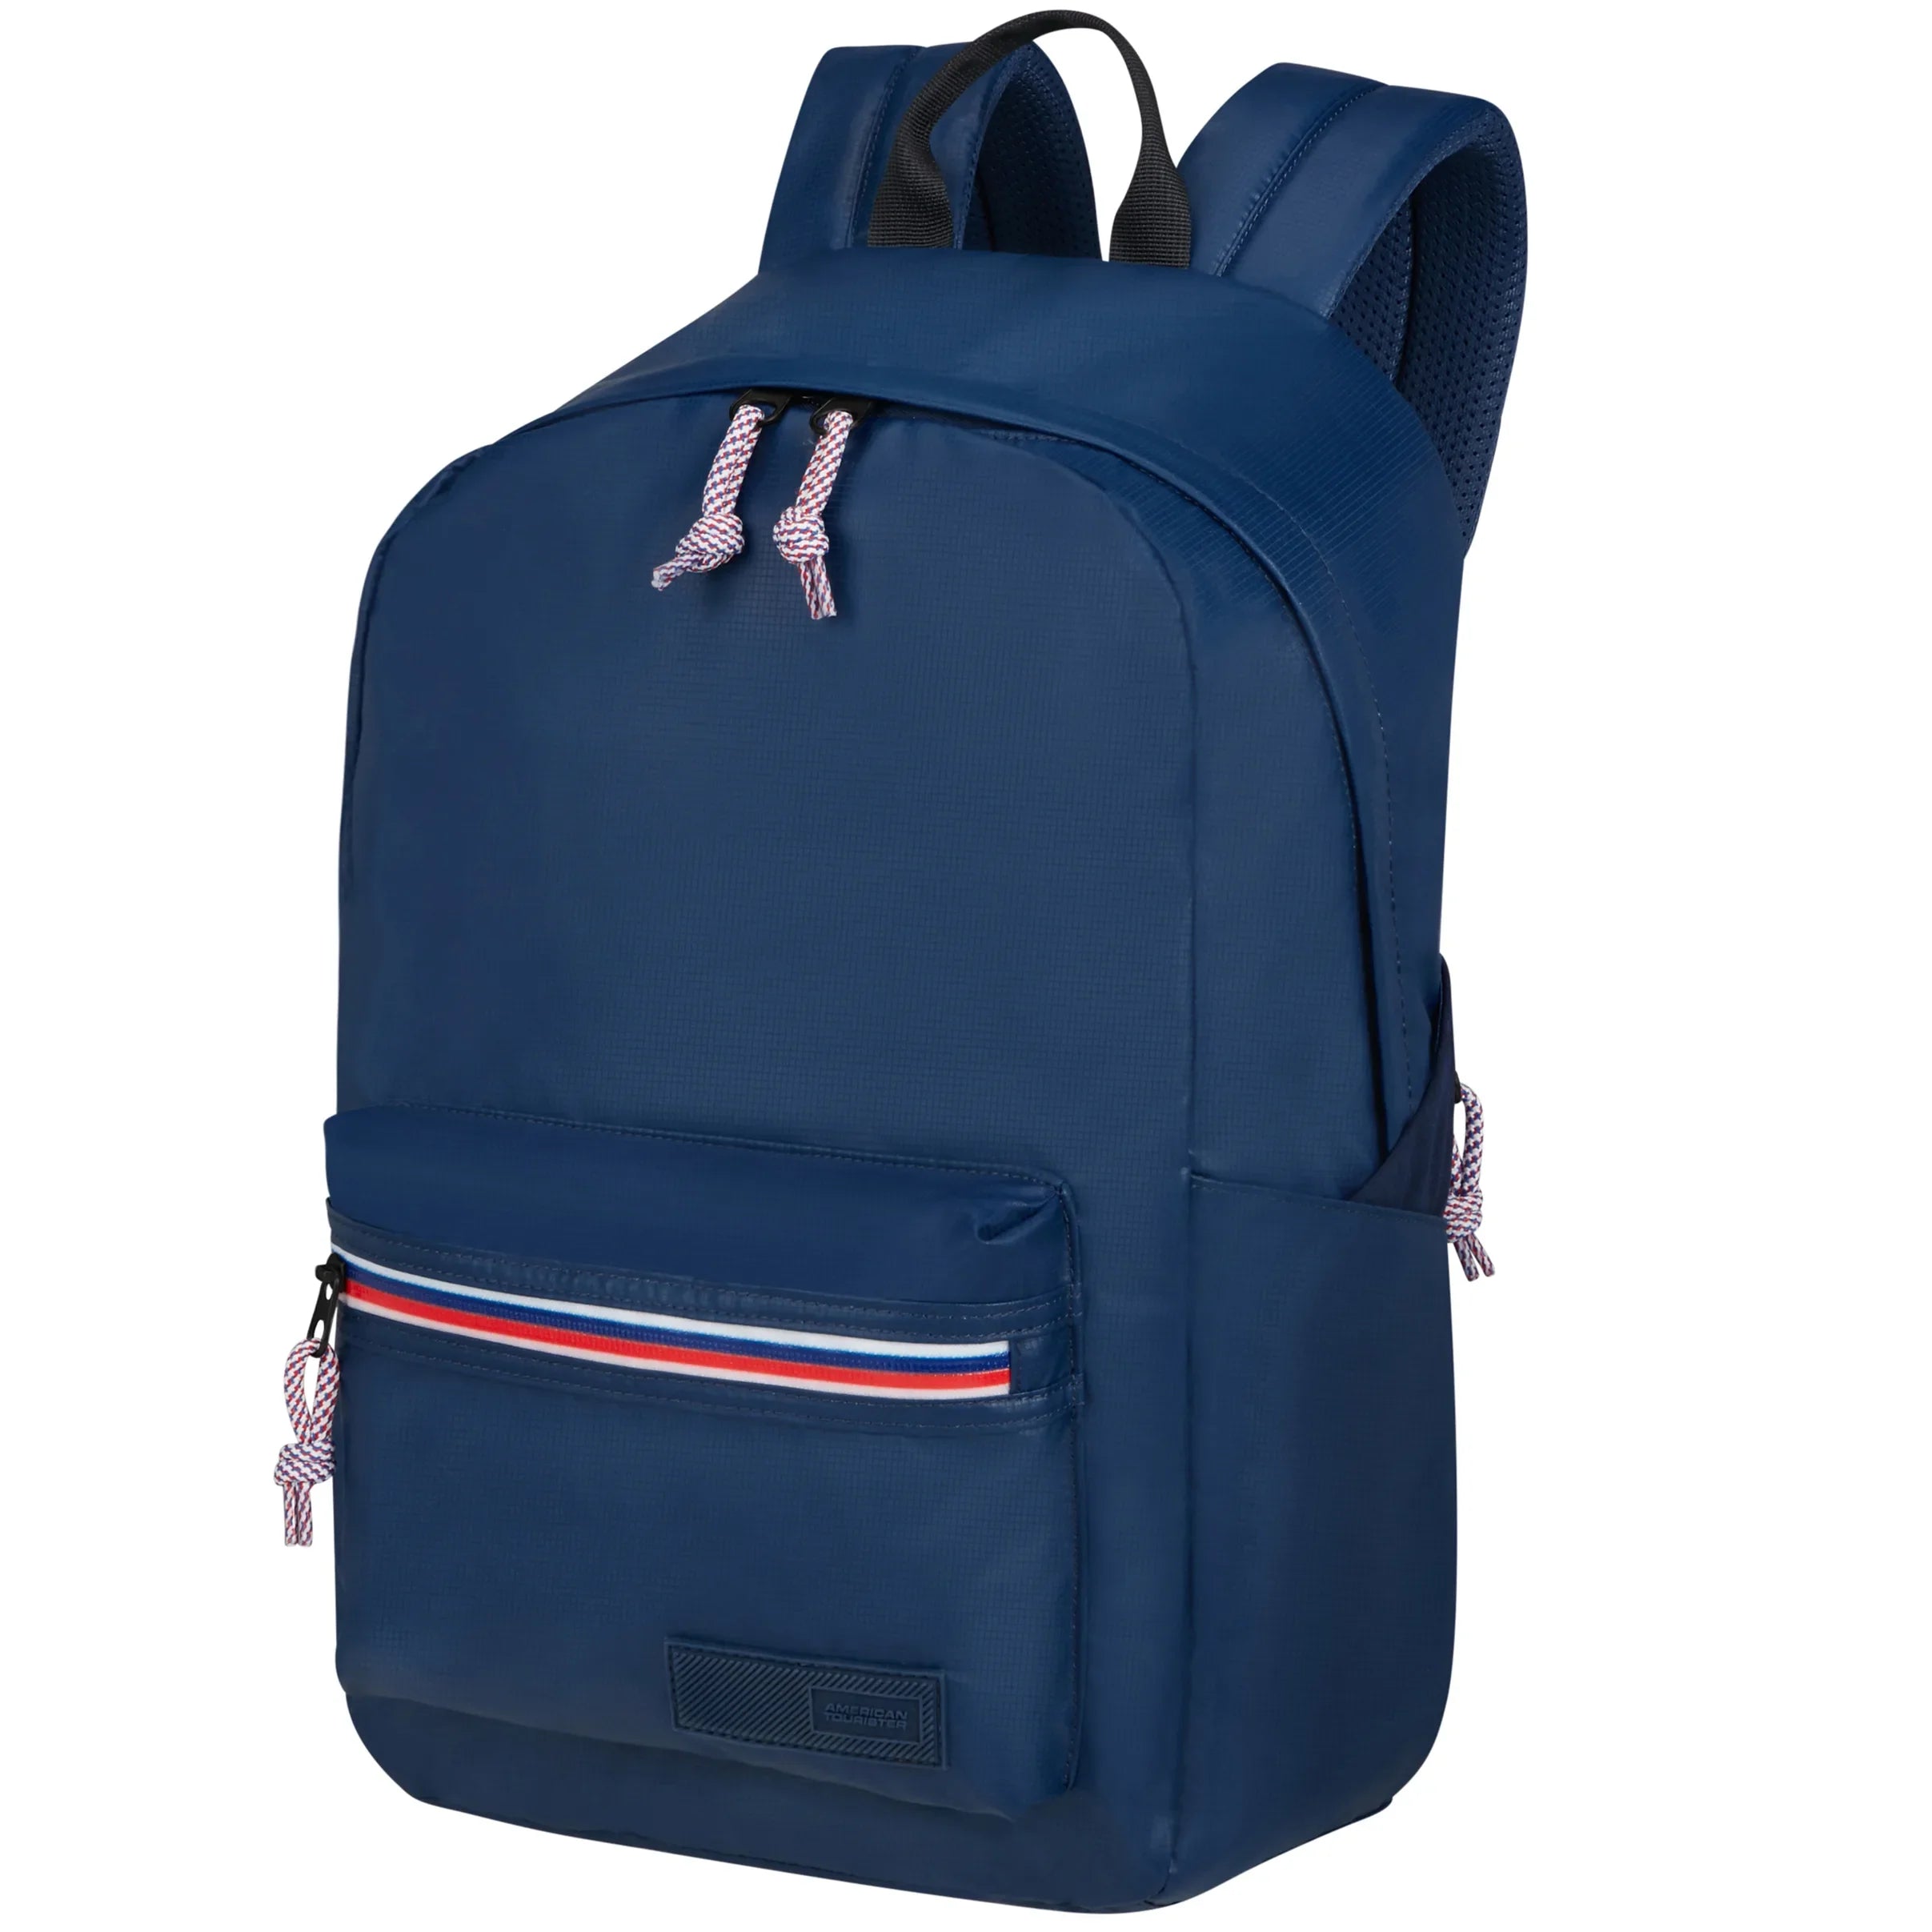 American Tourister Upbeat Pro coated backpack 43 cm - Navy